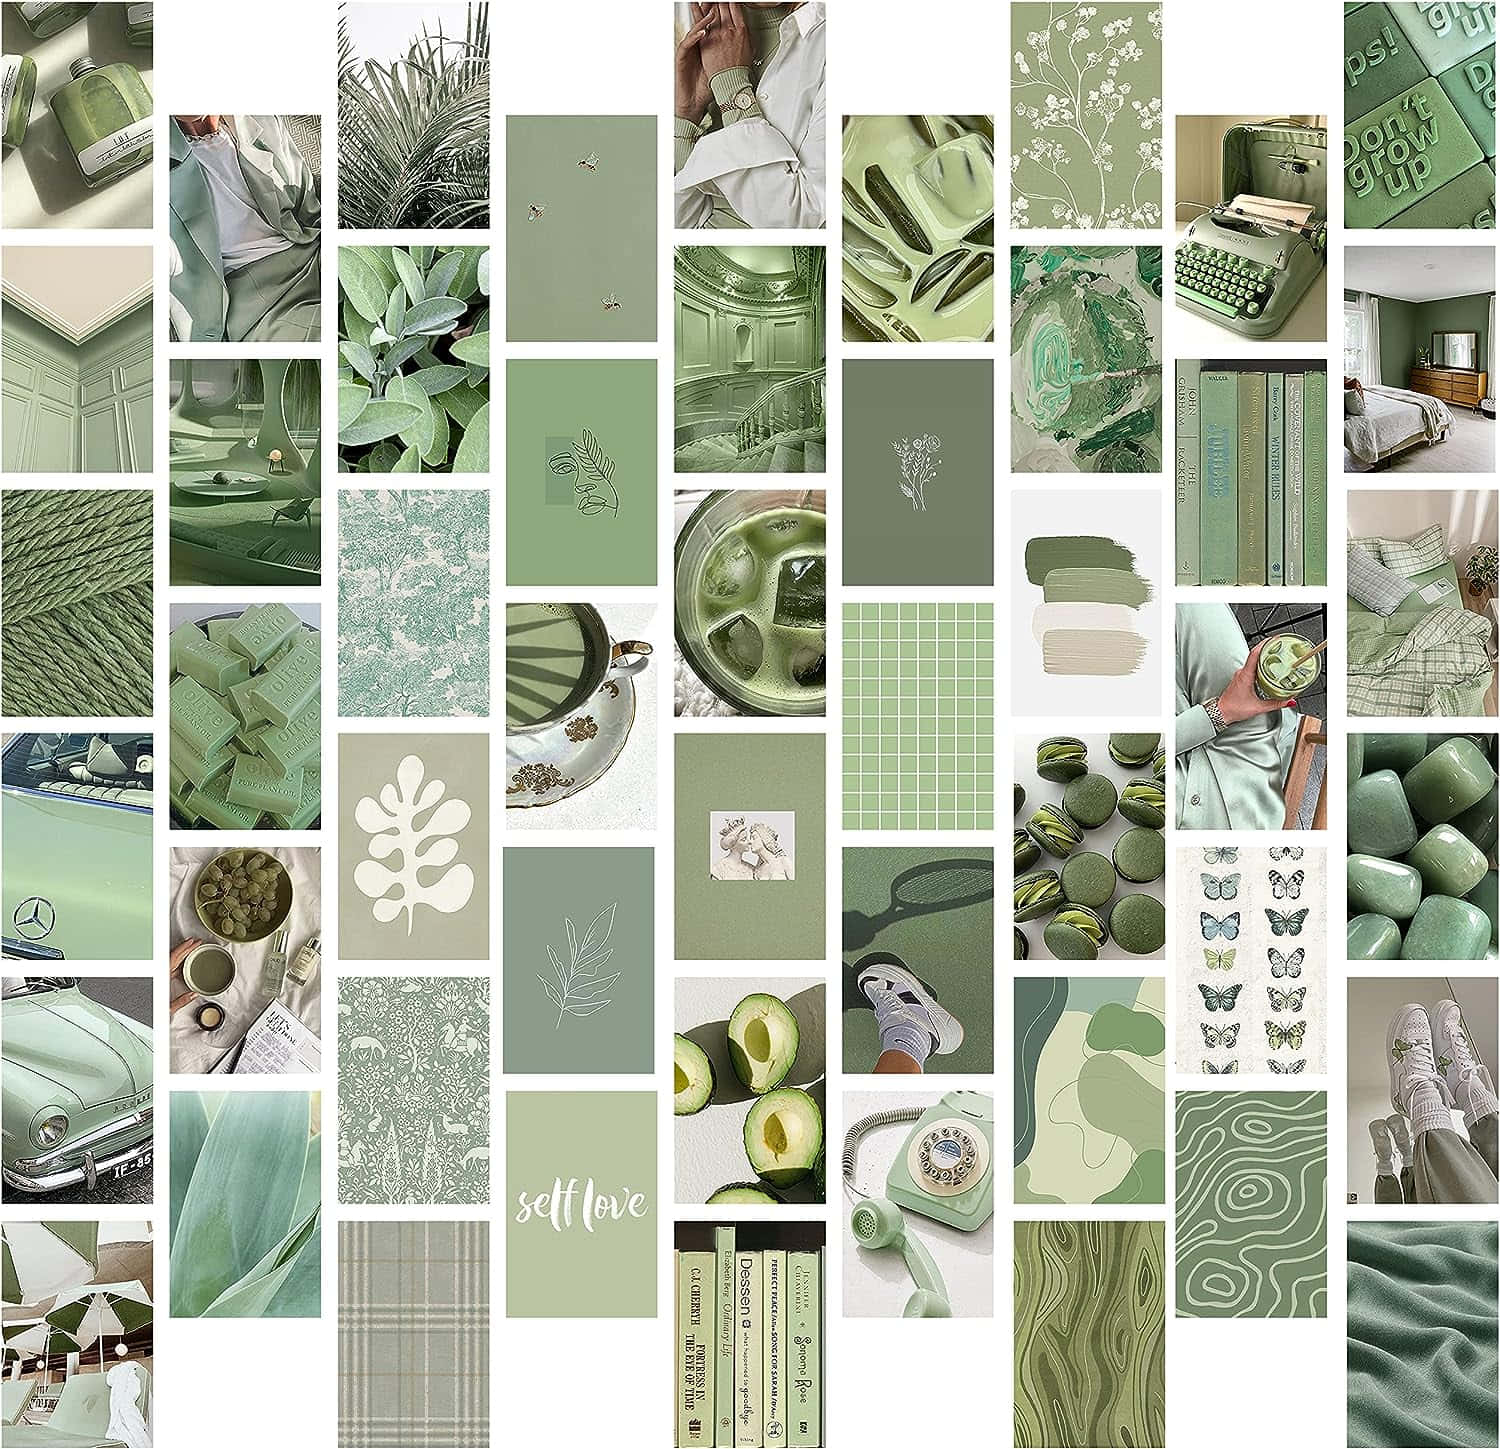 Matcha Toned Moodboard Collage Wallpaper